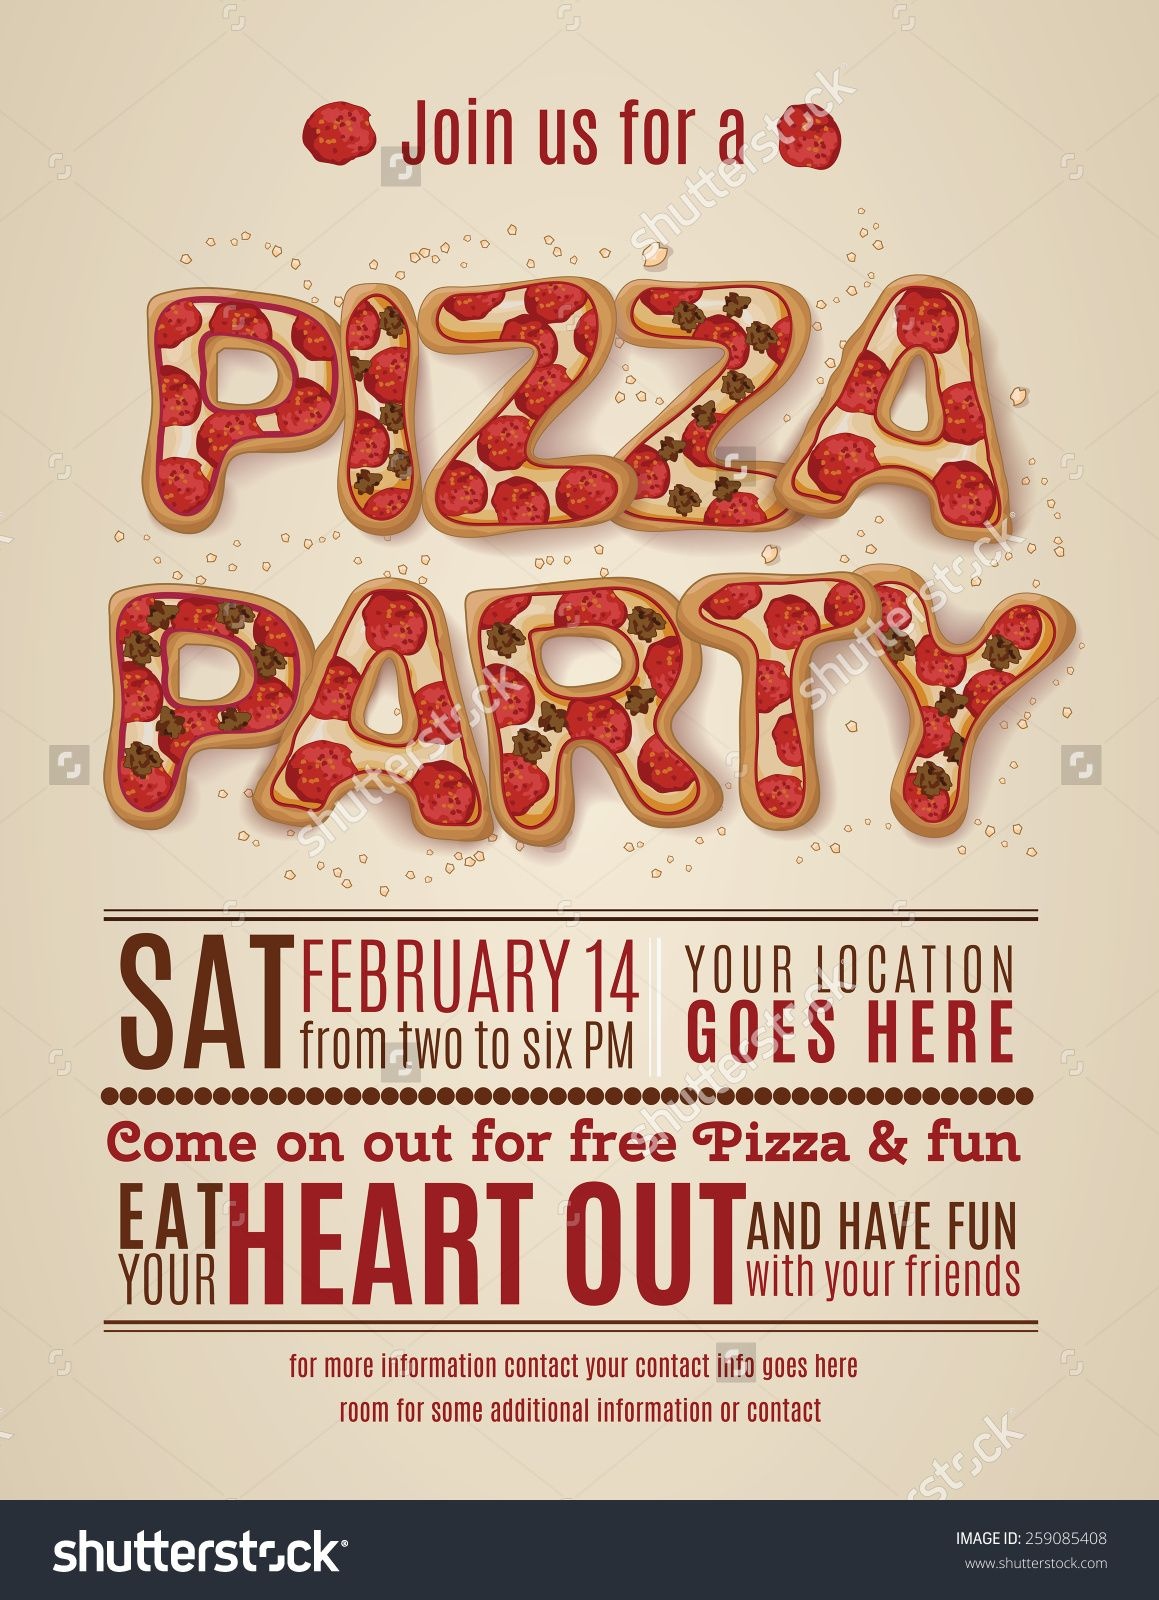 Pizza Party Invitation Template Free - Invitation Templates Design - Free Printable Flyers For Parties